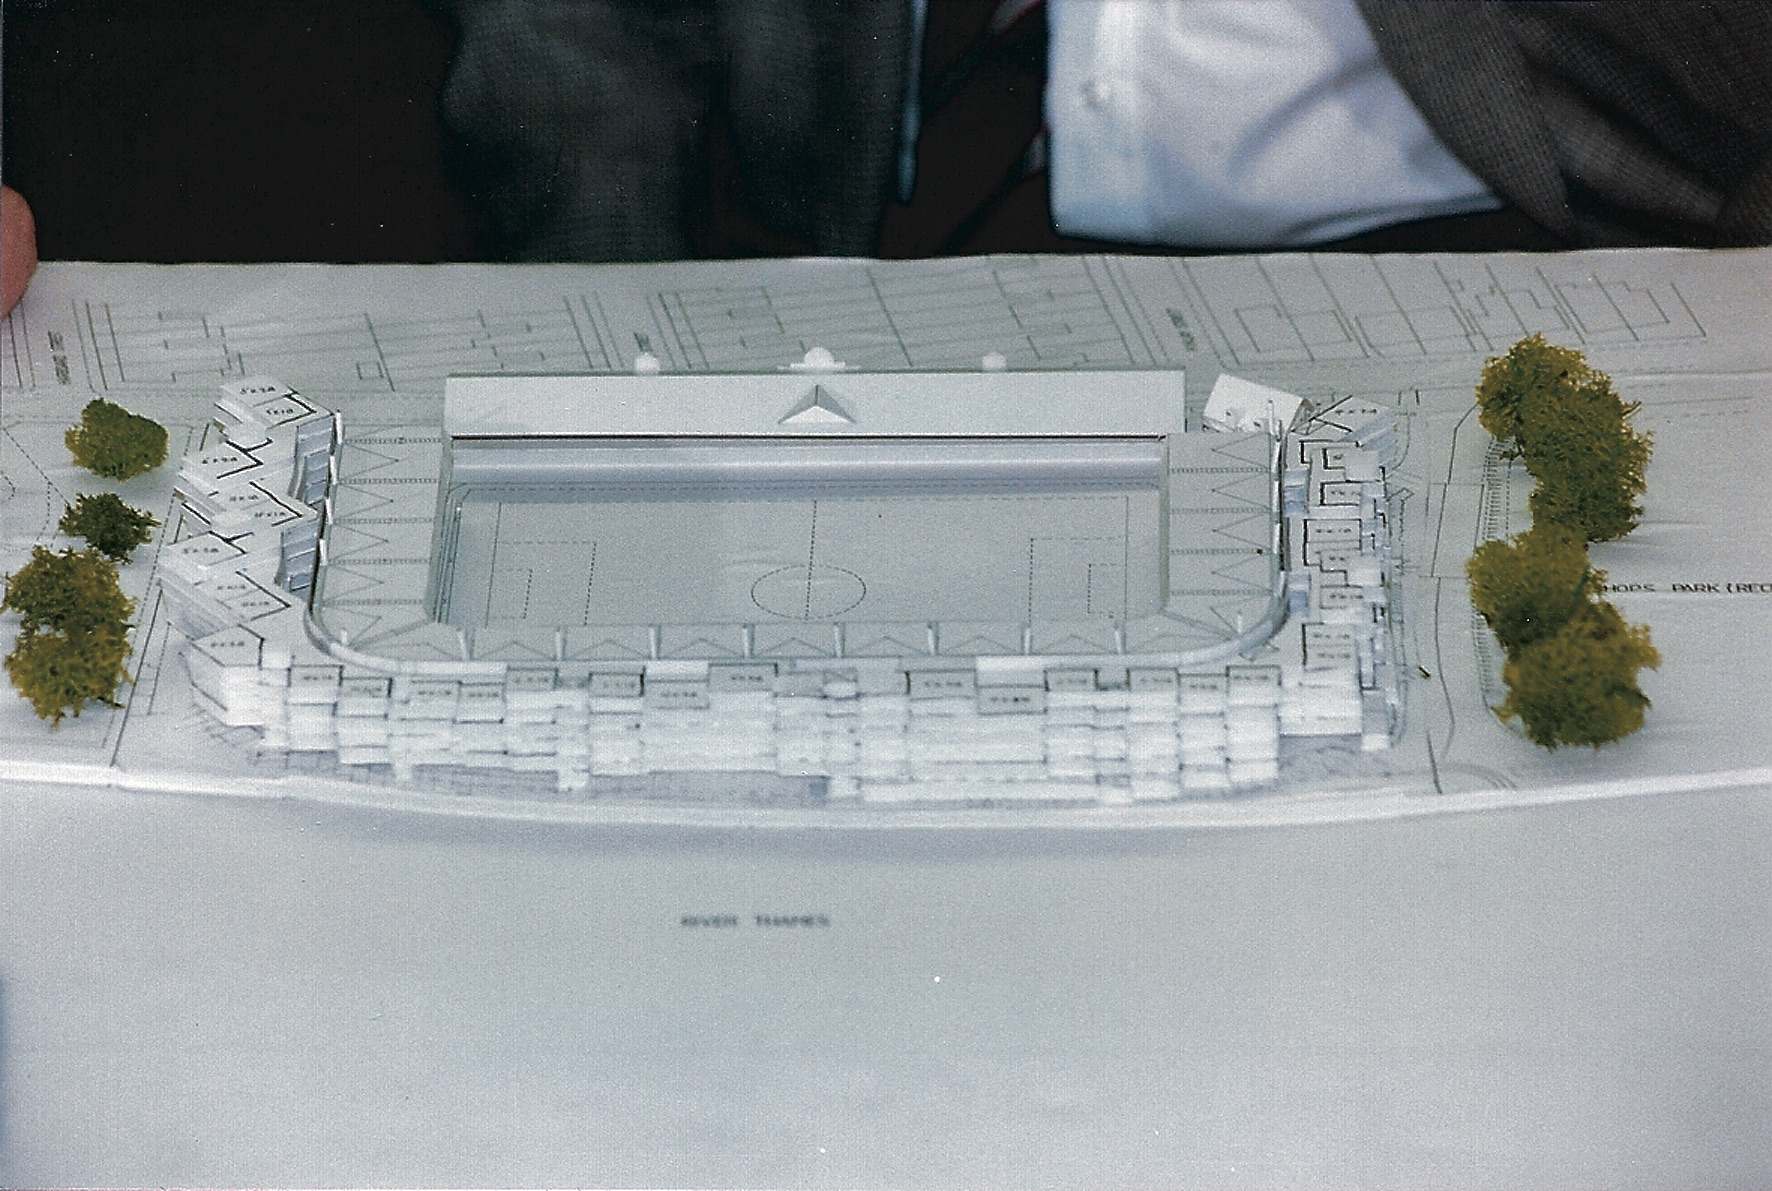 Artists Model of the 2002 design